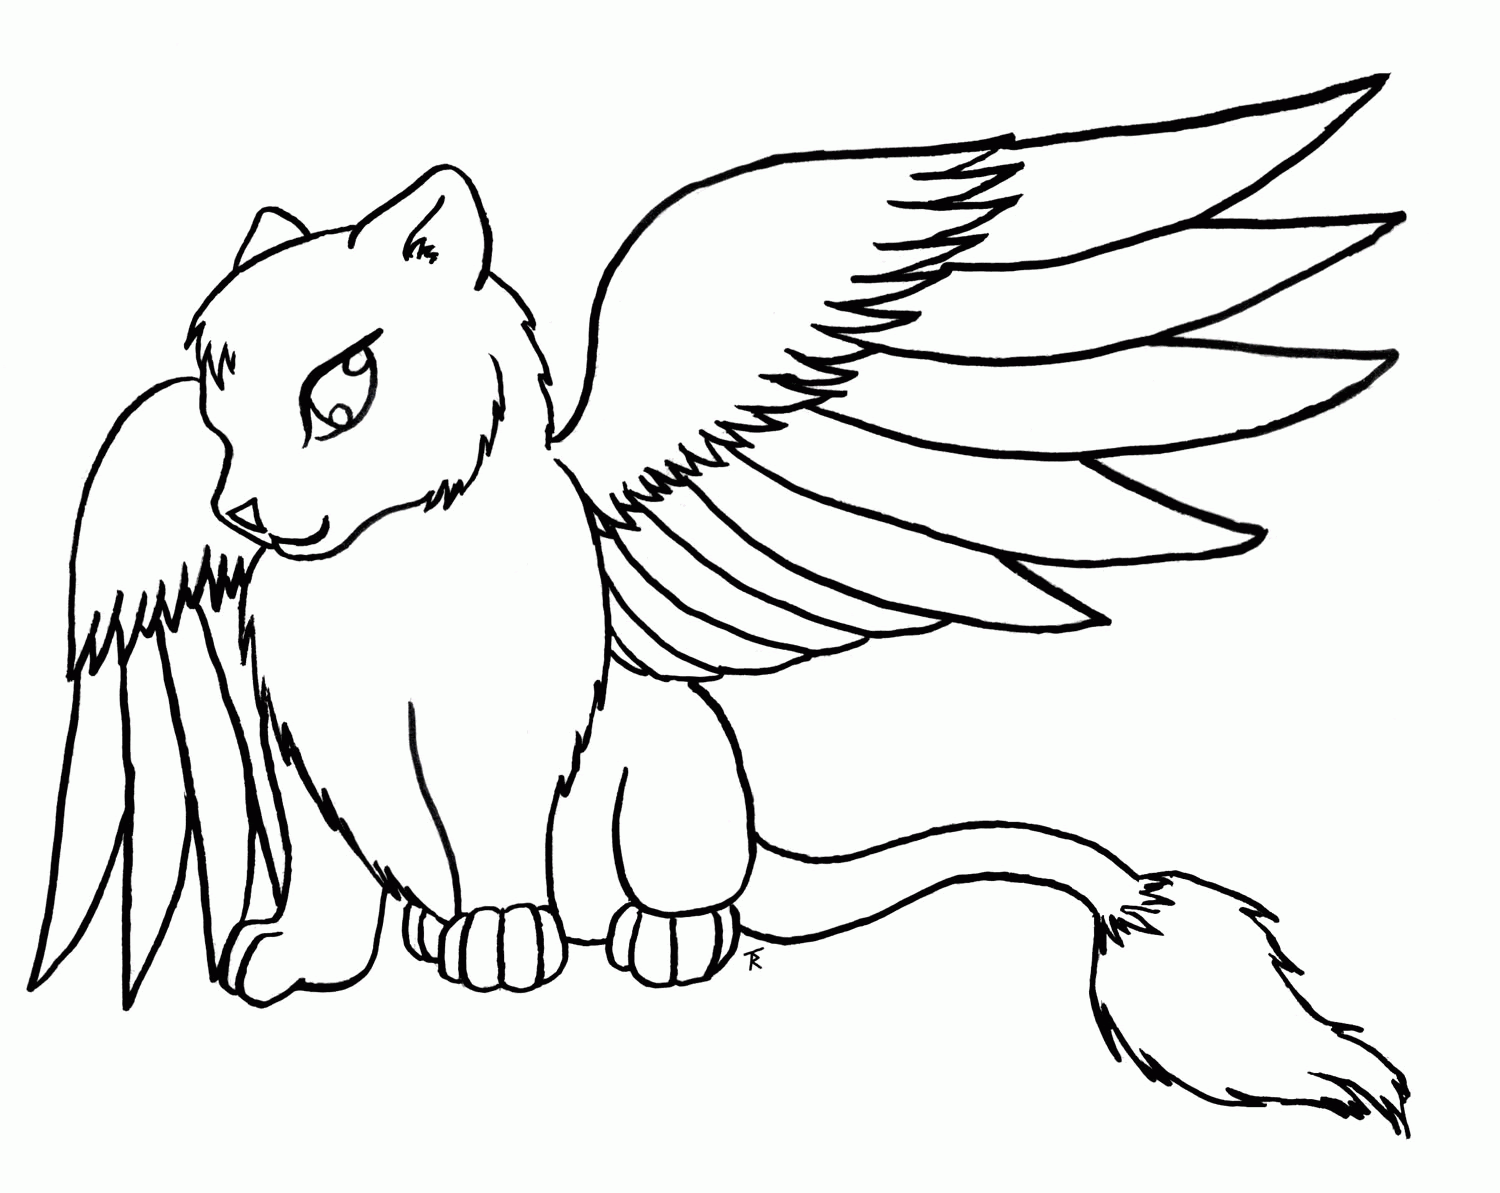 If there are wolves or other animals that interfere, the wolf father does not hesitate to fight and defeat him. Free Wolves With Wings Coloring Pages Download Free Wolves With Wings Coloring Pages Png Images Free Cliparts On Clipart Library